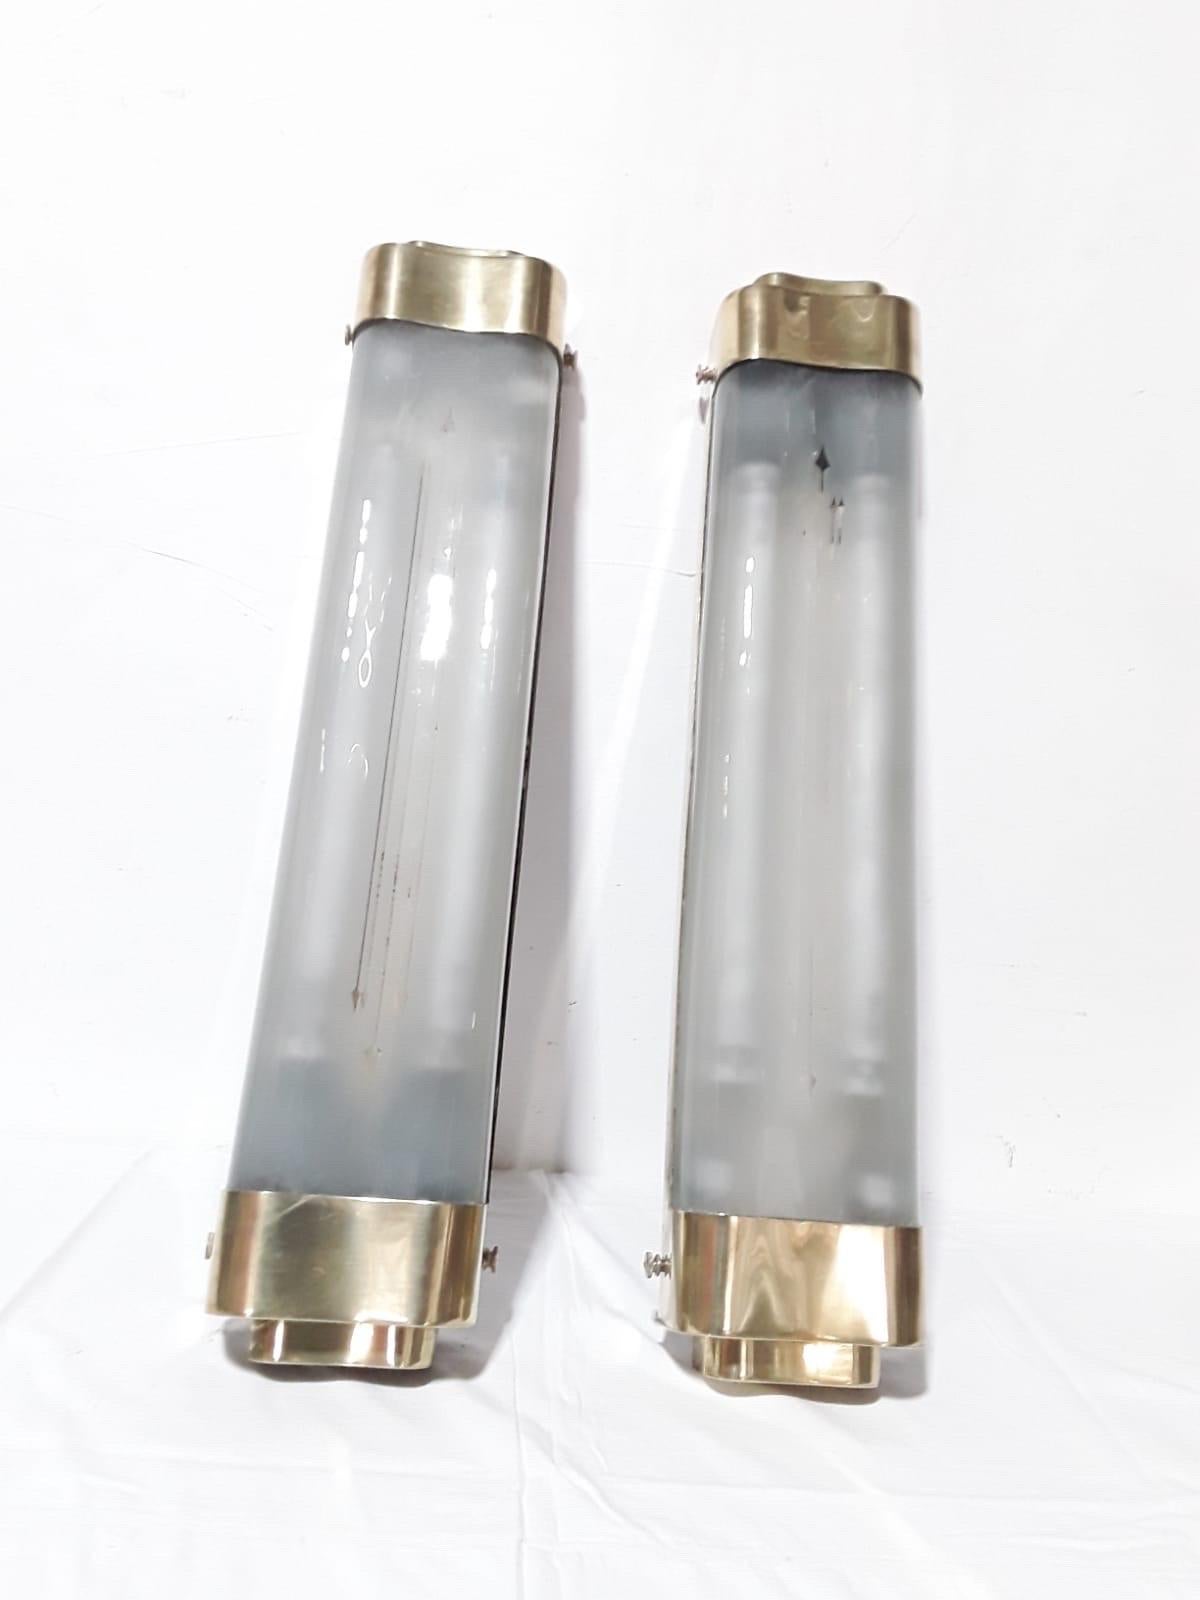 Big brass & glass wall lamps top design 1950s Attr Pietro Chiesa

Very good condition and very nice

Measures 
Cm 85 x cm 20.